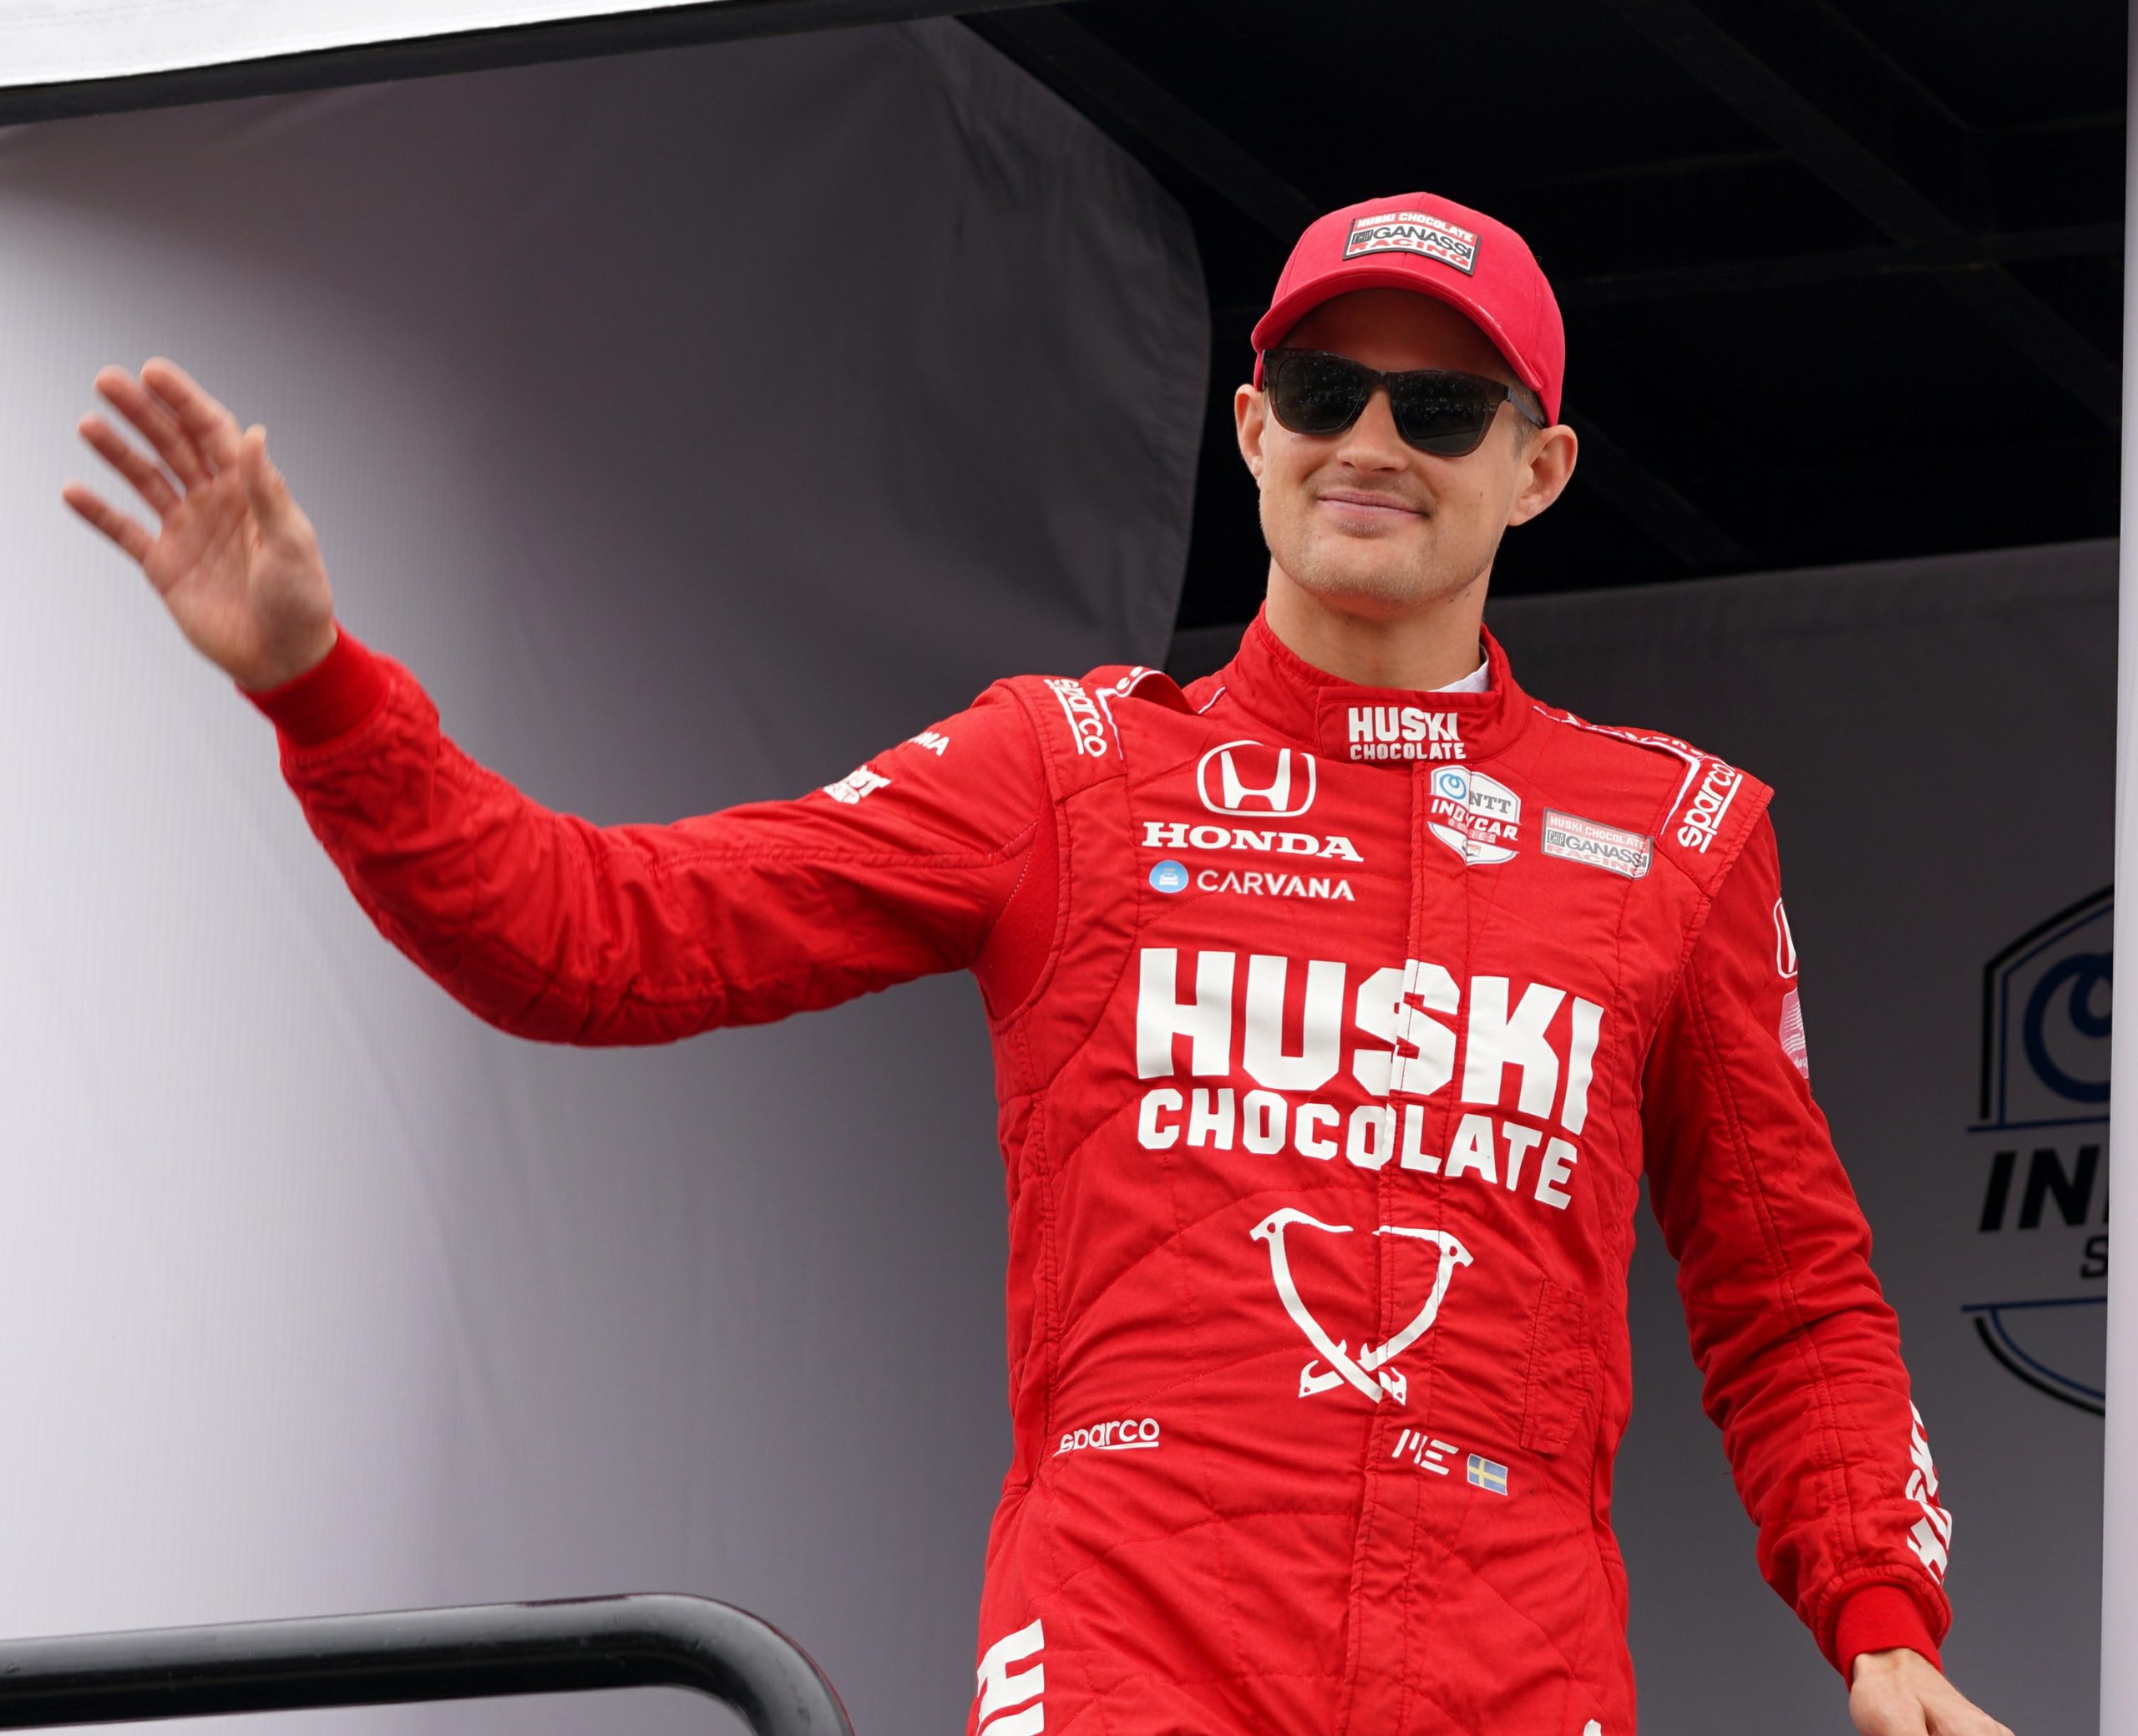 Marcus Ericsson waves to the crowd before the start of the 2021 Acura Grand Prix of Long Beach.